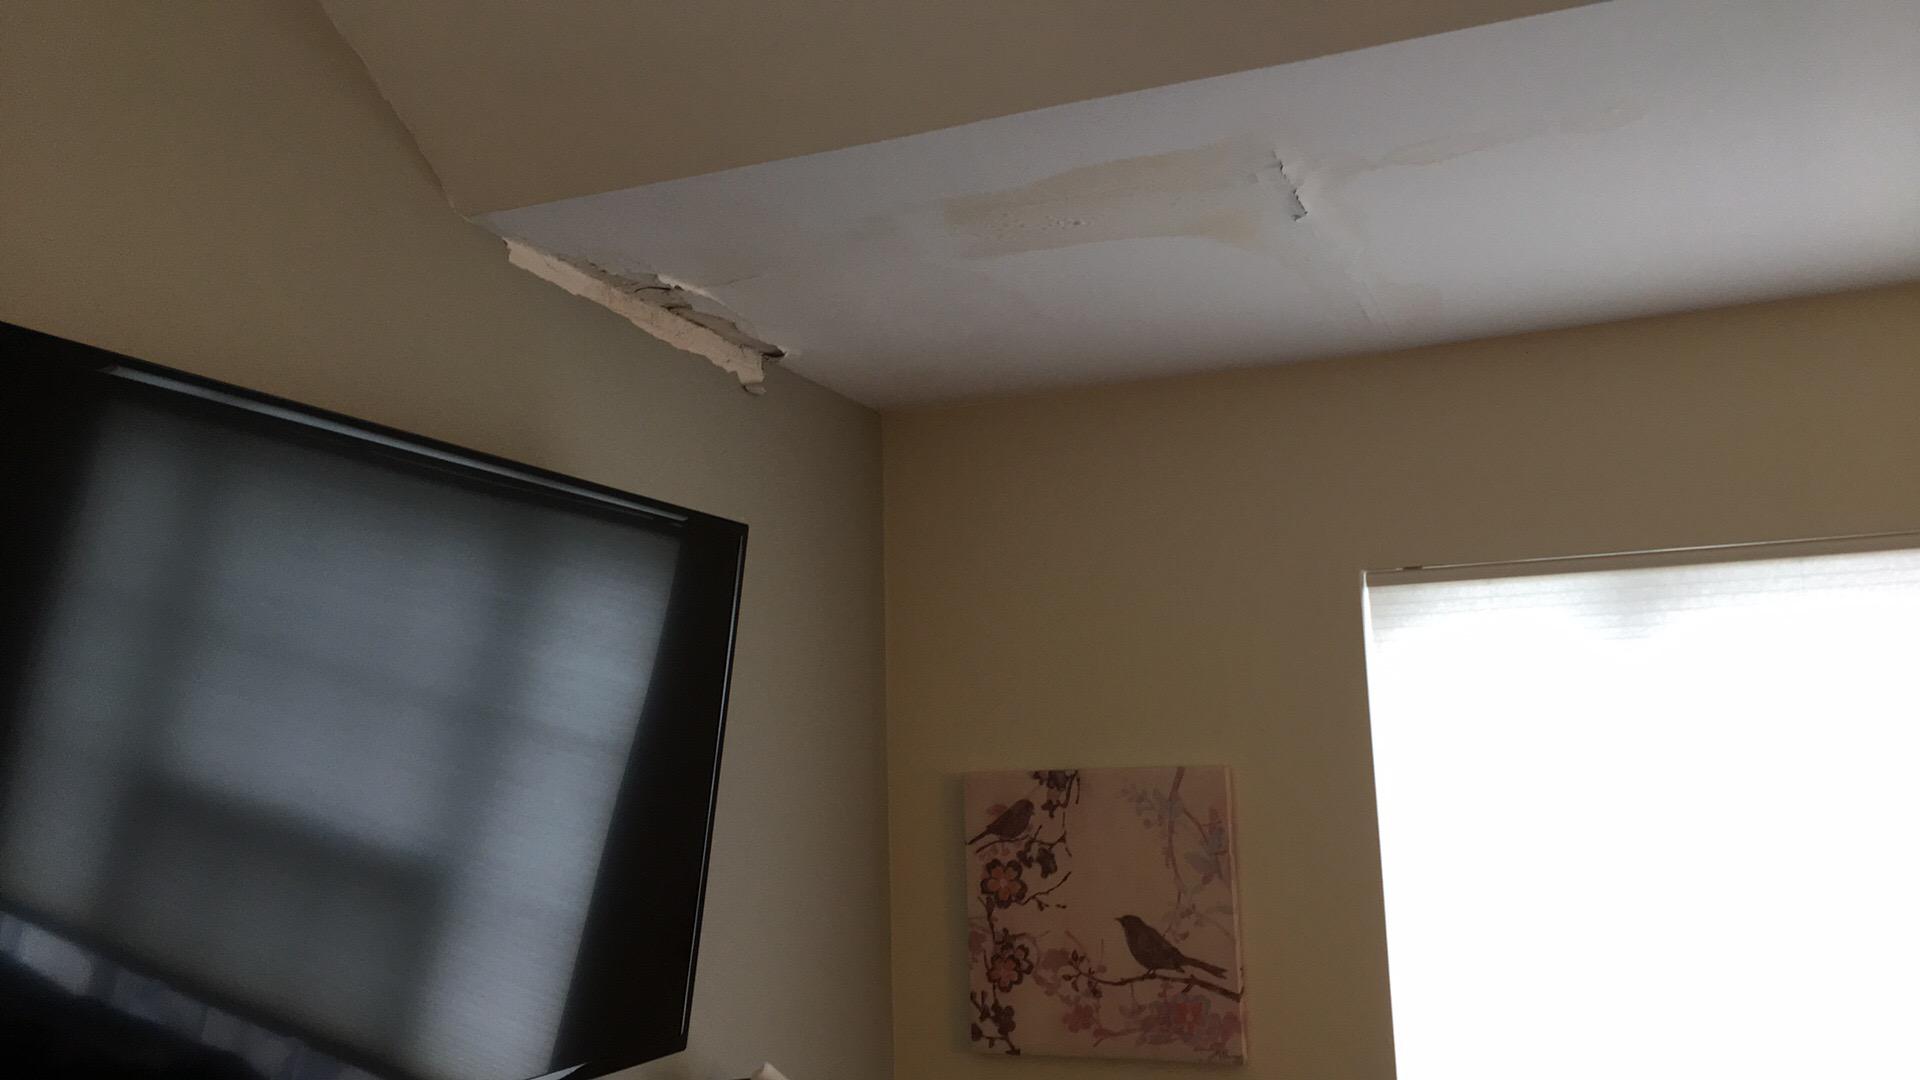 Ice caused damage to ceiling